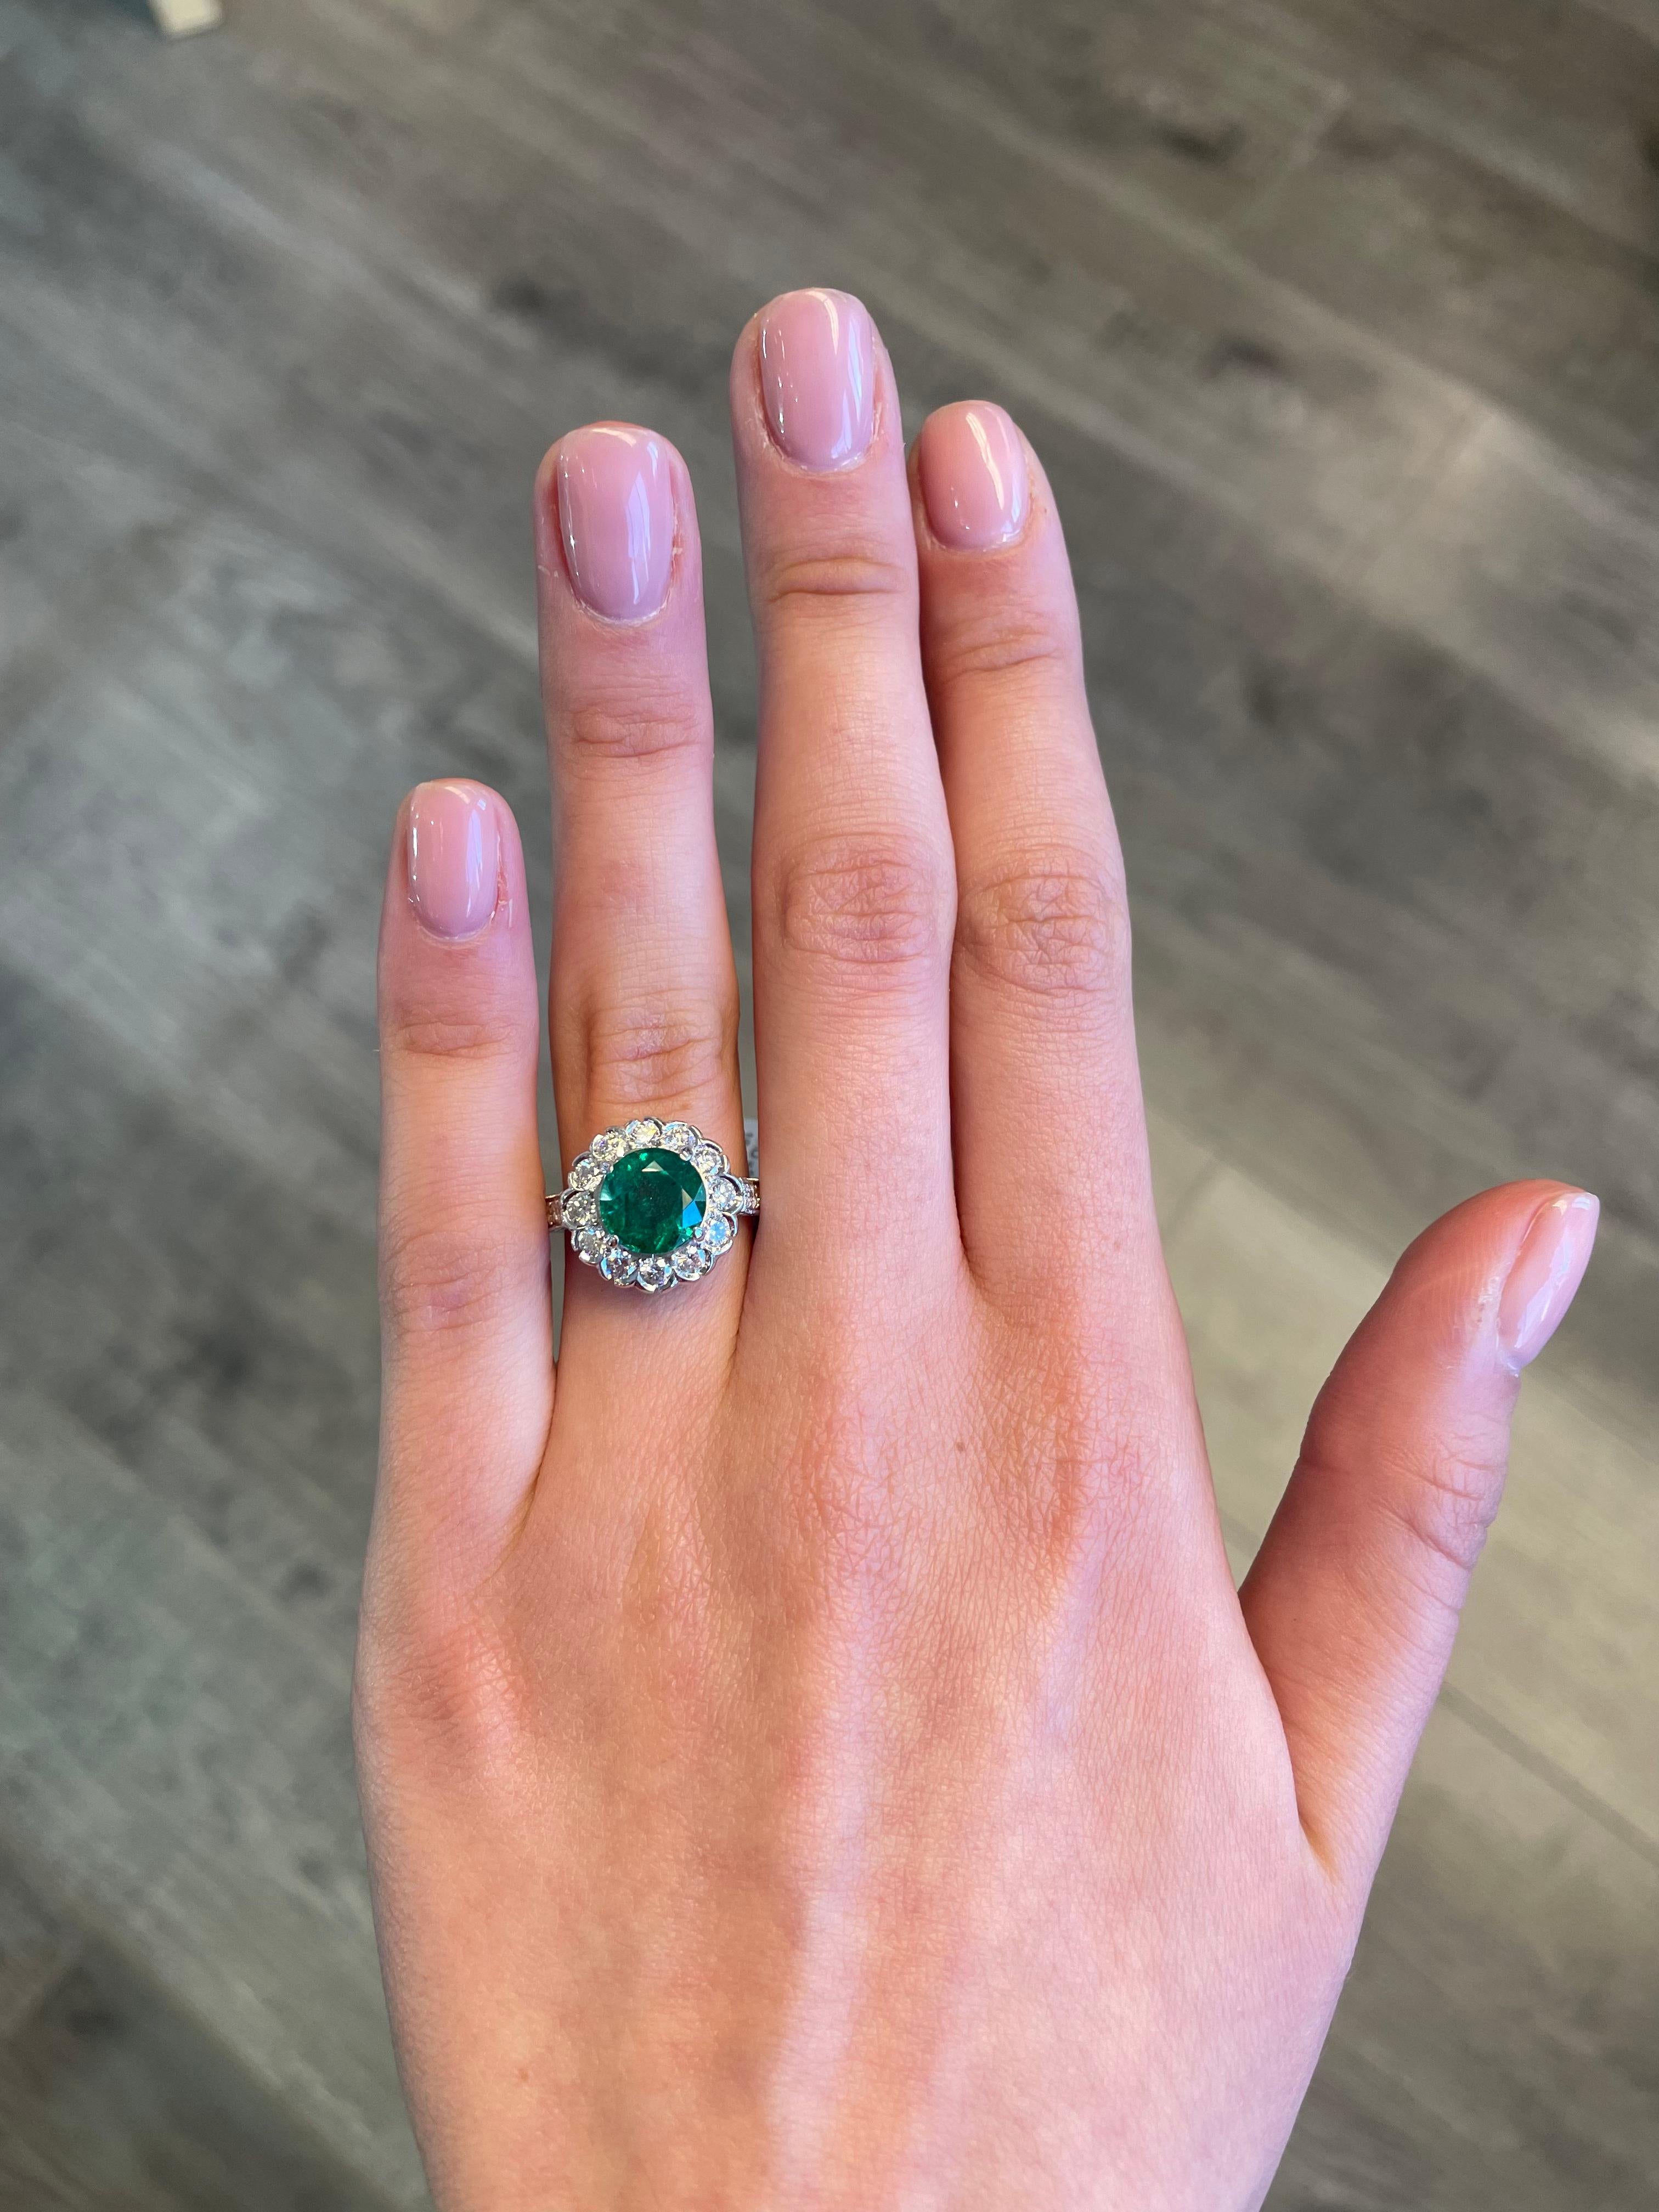 Art Deco inspired emerald and diamond halo ring with milgrain and filigree work.
3.40 carats total gemstone weight.
2.47 carat round cut emerald, apx F2. Complimented by 18 round brilliant diamonds, 0.93 carats. Approximately G/H color and SI